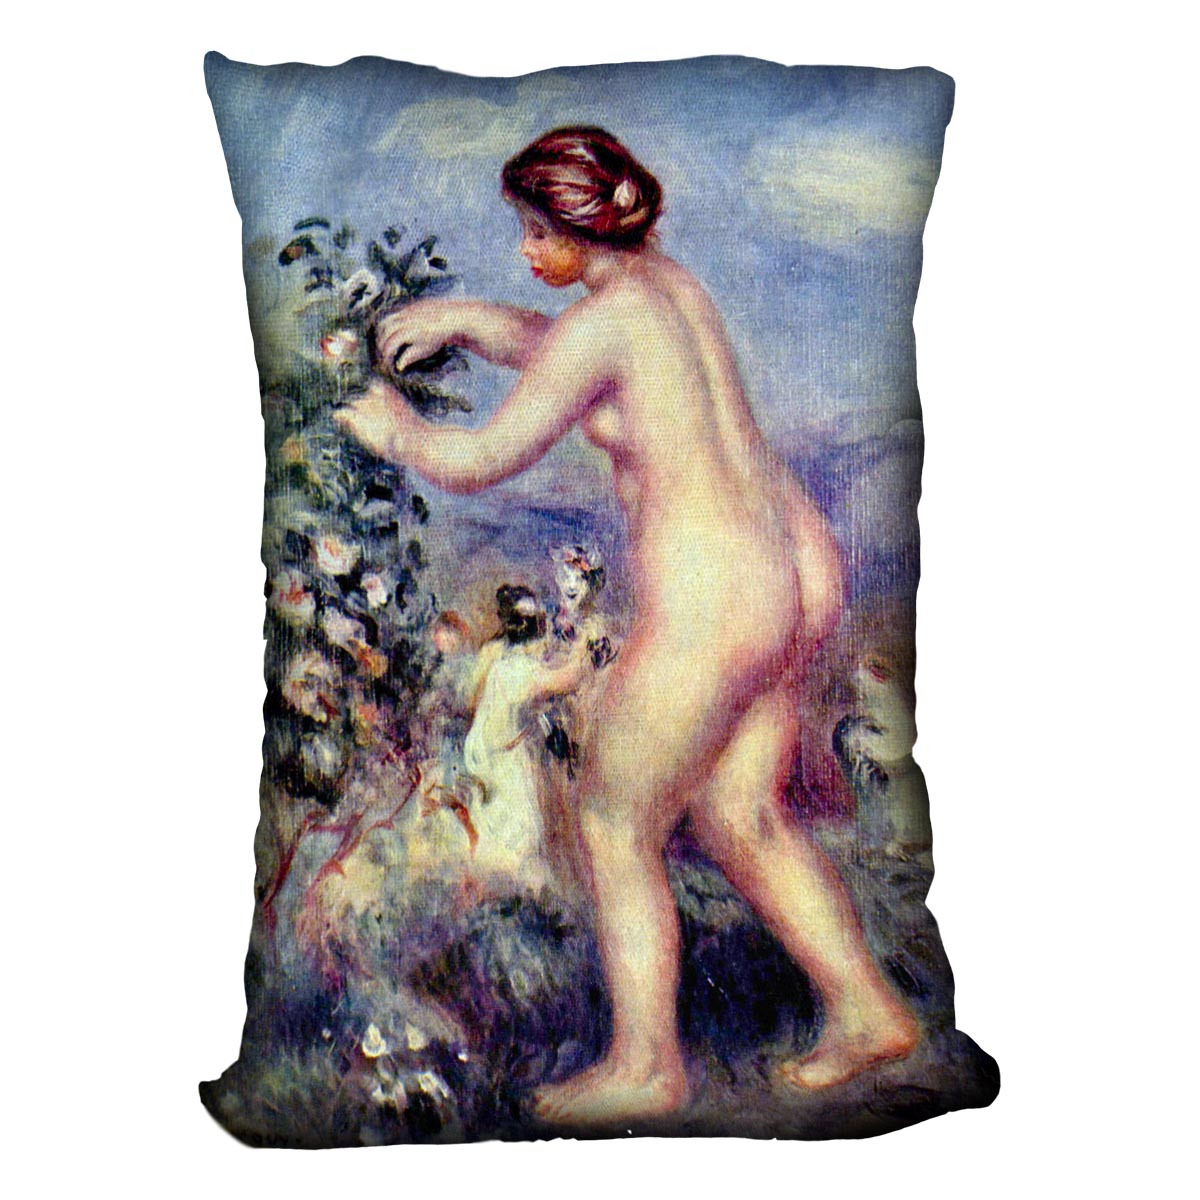 Ode to flower after Anakreon by Renoir Cushion